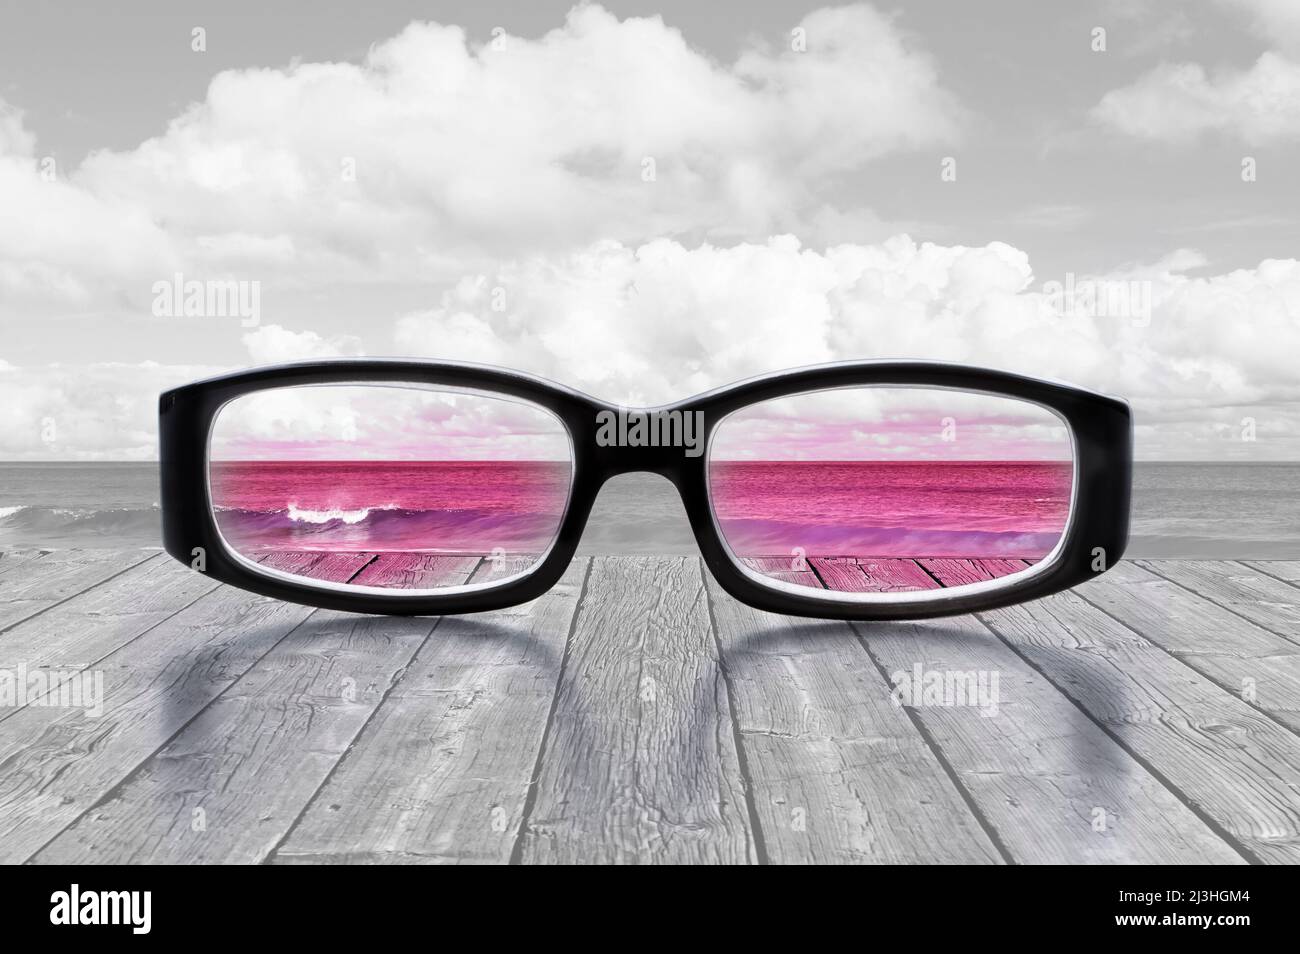 Seeing the world through rose colored glasses Stock Photo